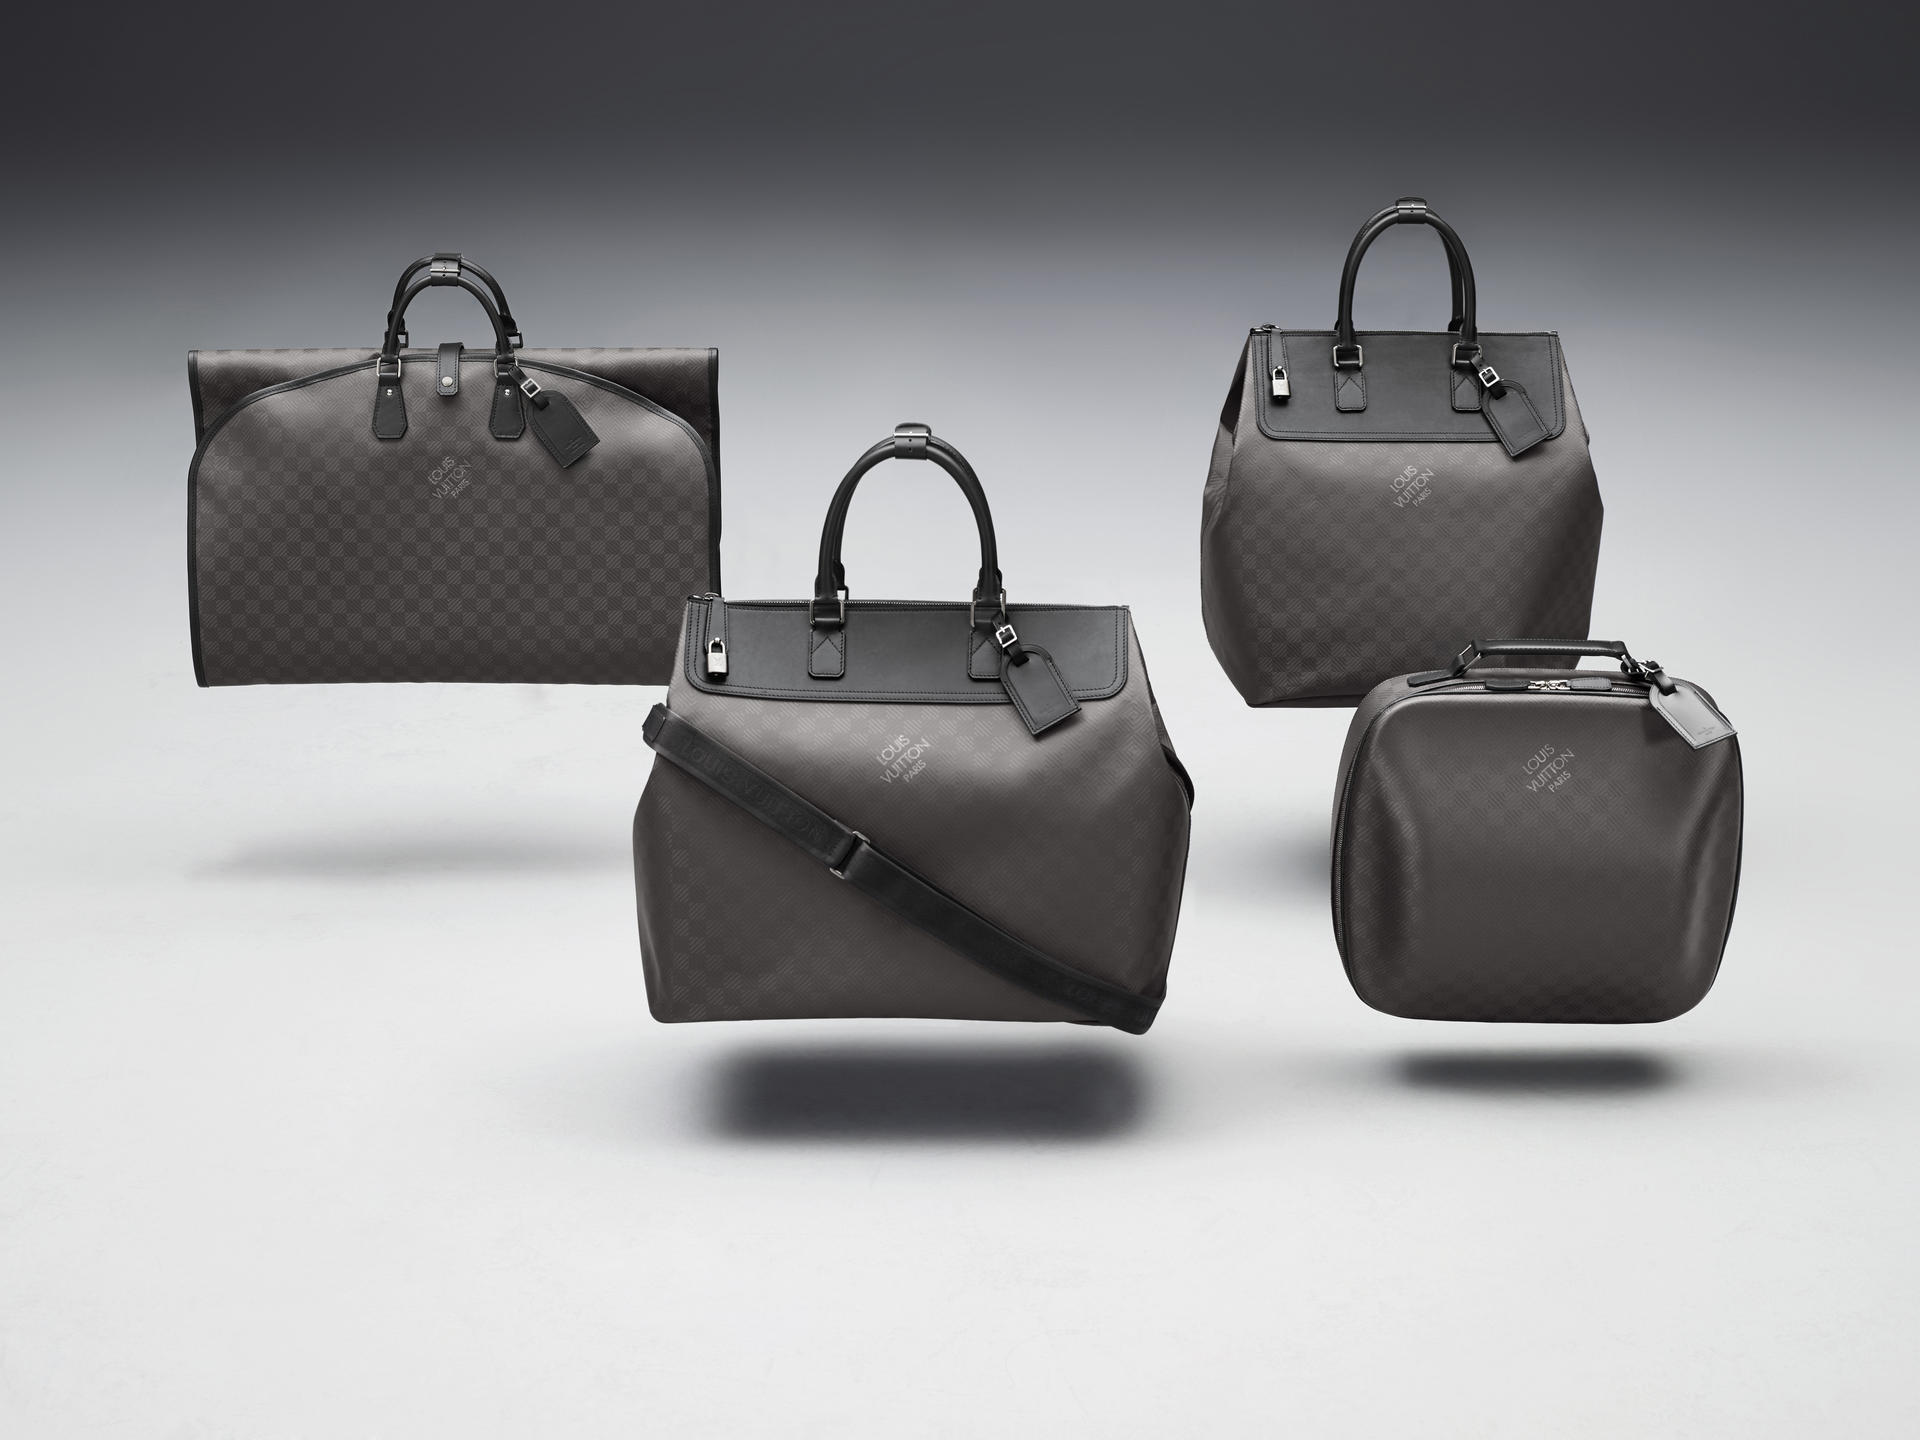 Louis Vuitton creates tailor-made luggage for BMW i8 - PressReader